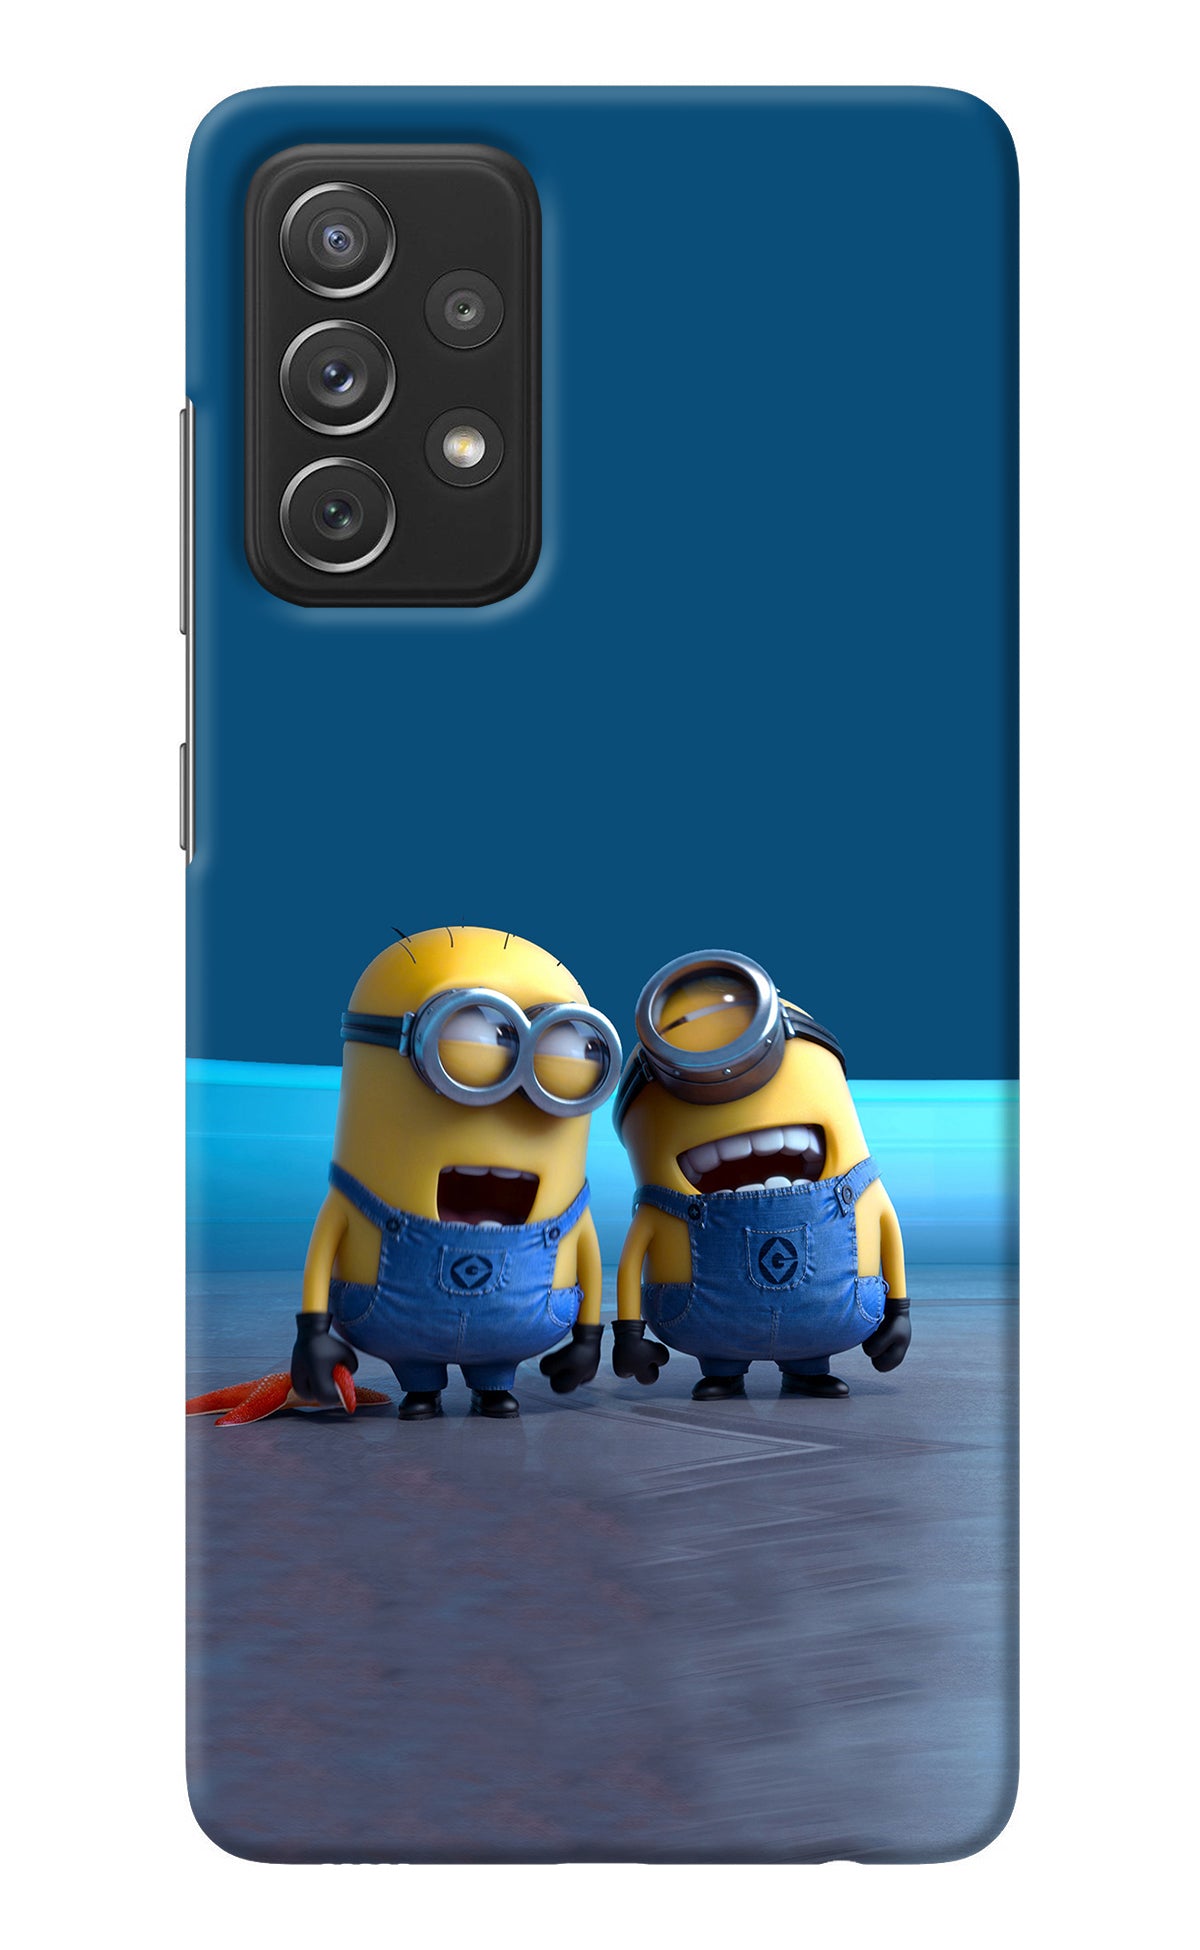 Minion Laughing Samsung A72 Back Cover